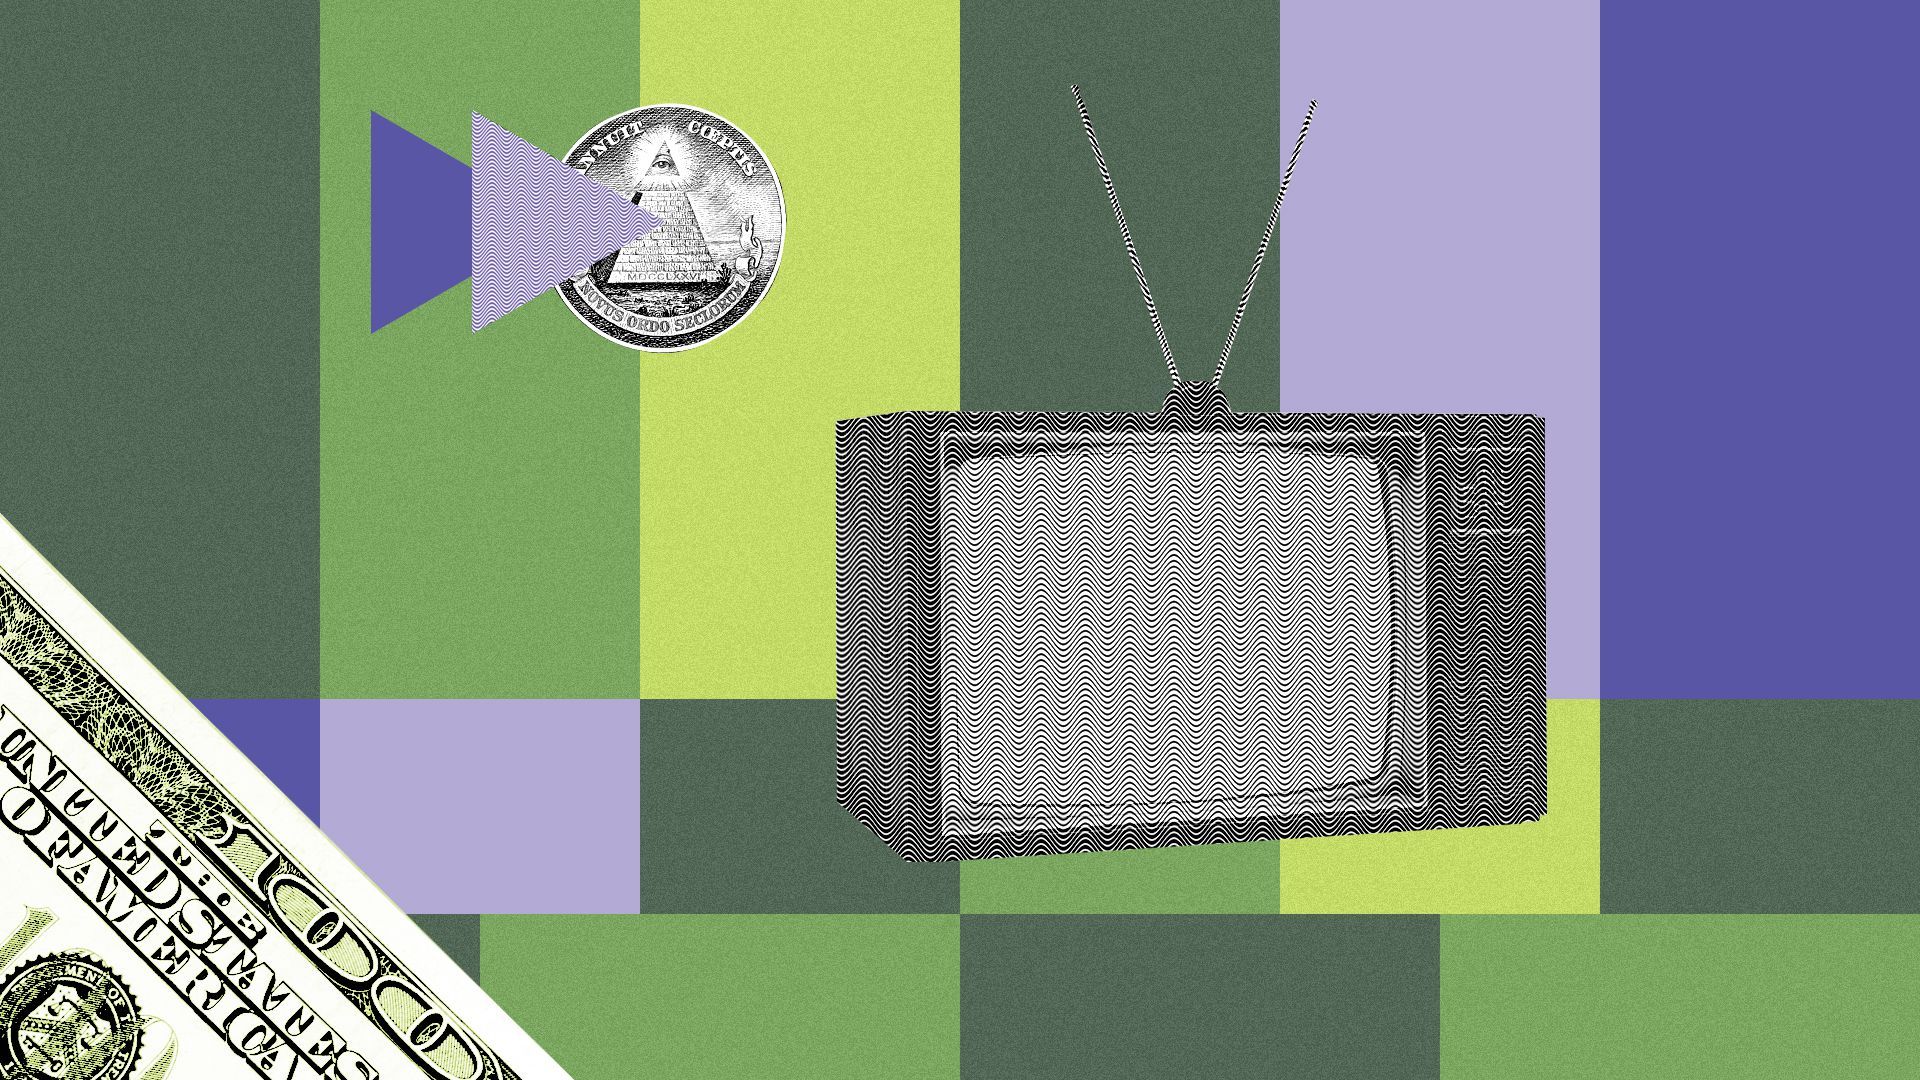 Illustration of a collage featuring an old TV, parts of dollar bills, and a TV test pattern.